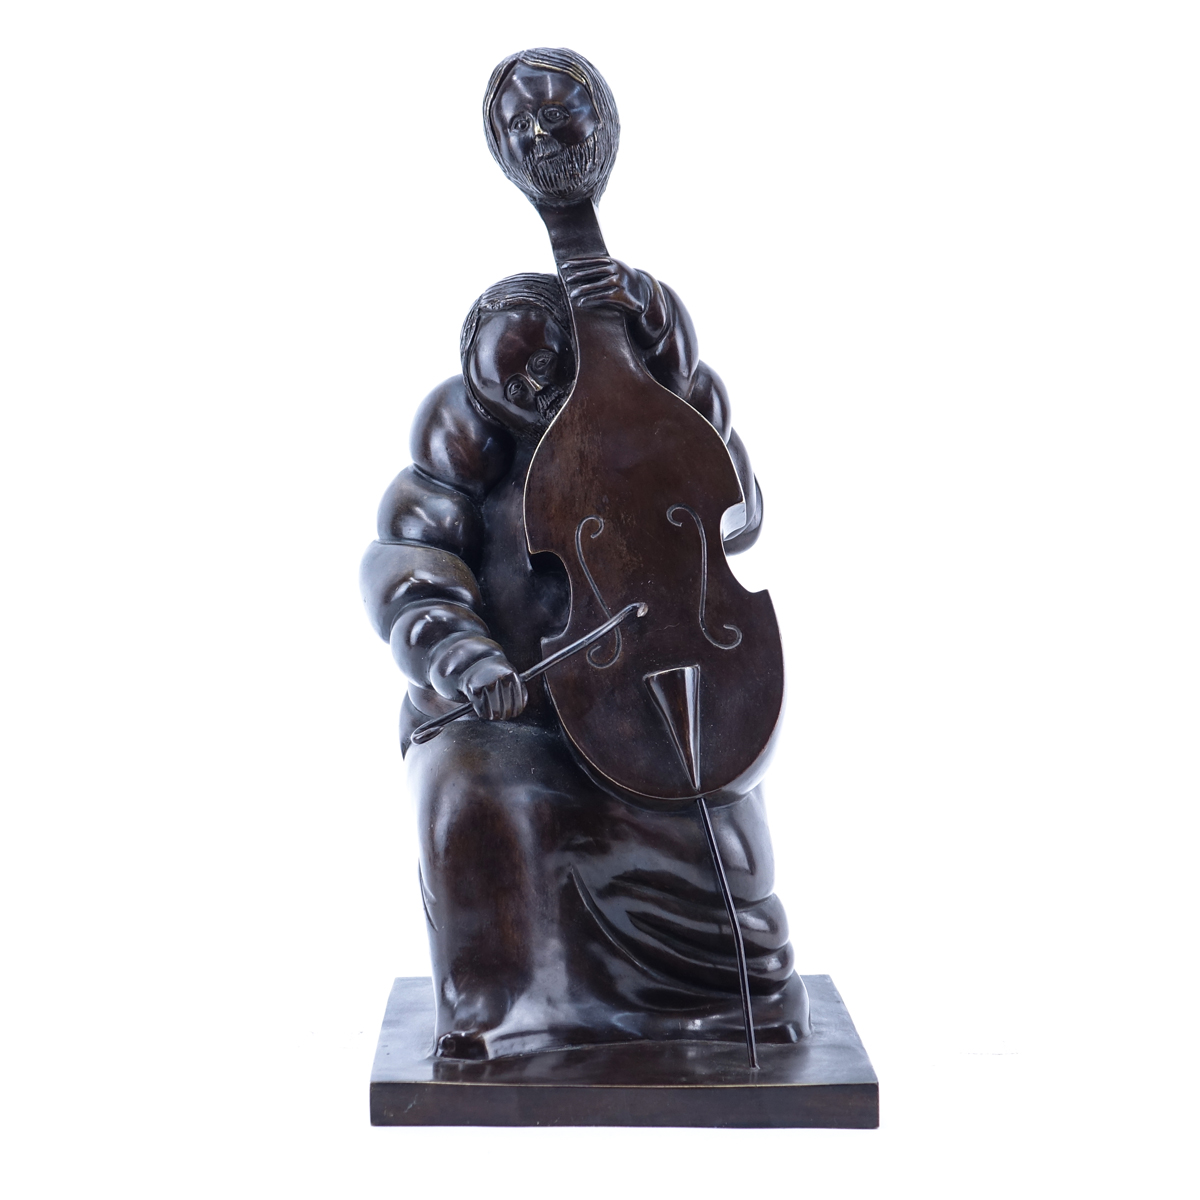 Fernando Péreznieto Mexican (1938–2001) Patinated Bronze Sculpture, Seated Instrument Player, Signed and Numbered 2/9. Good condition.